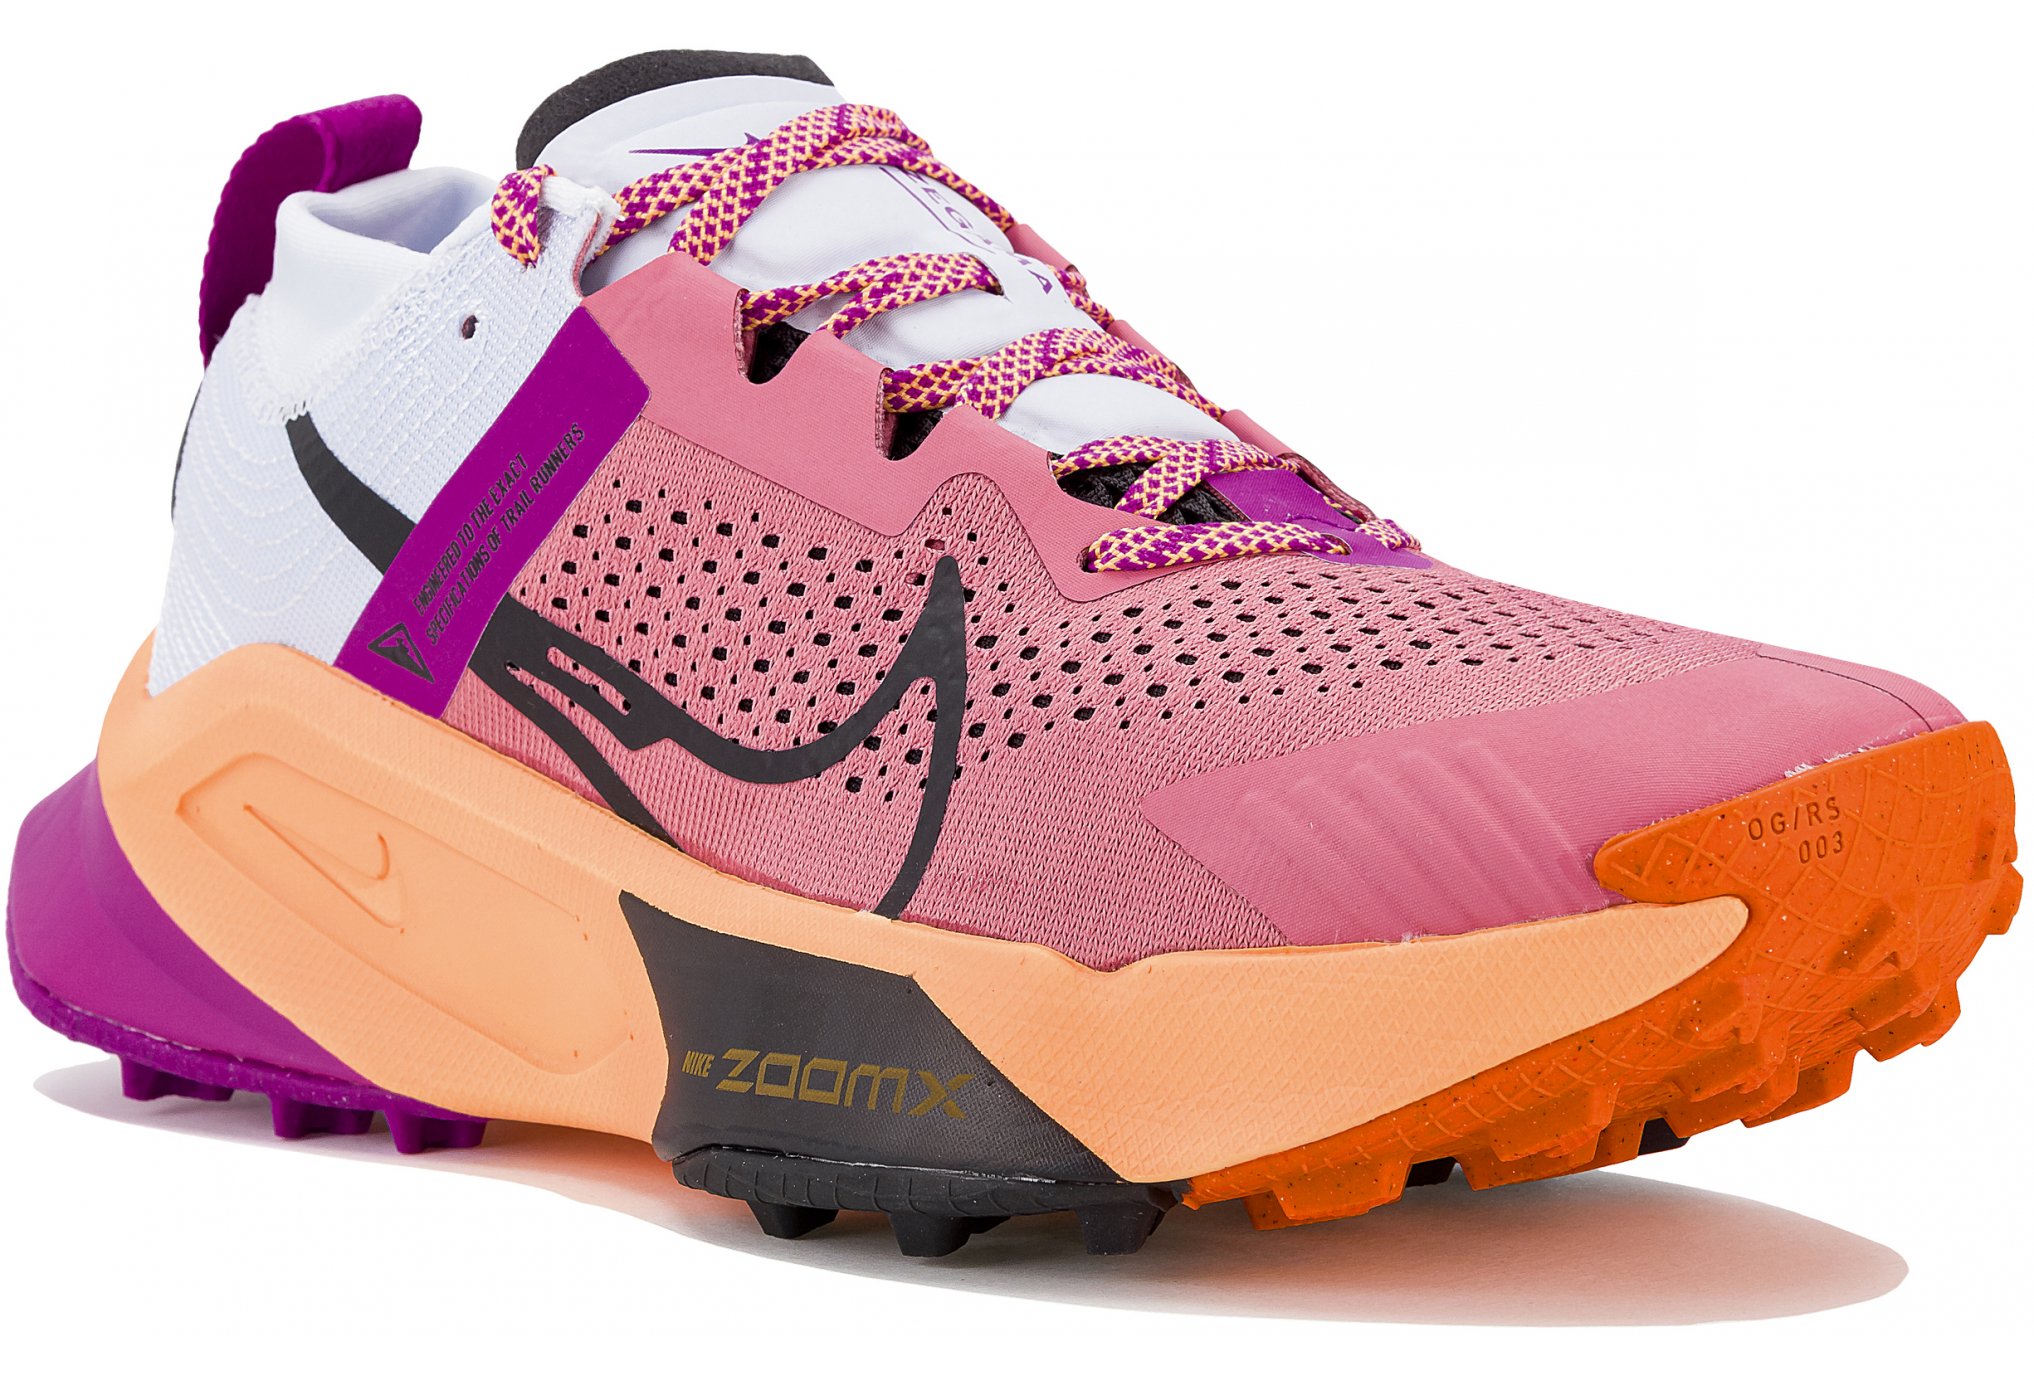 Nike ZoomX Zegama W Chaussures running femme